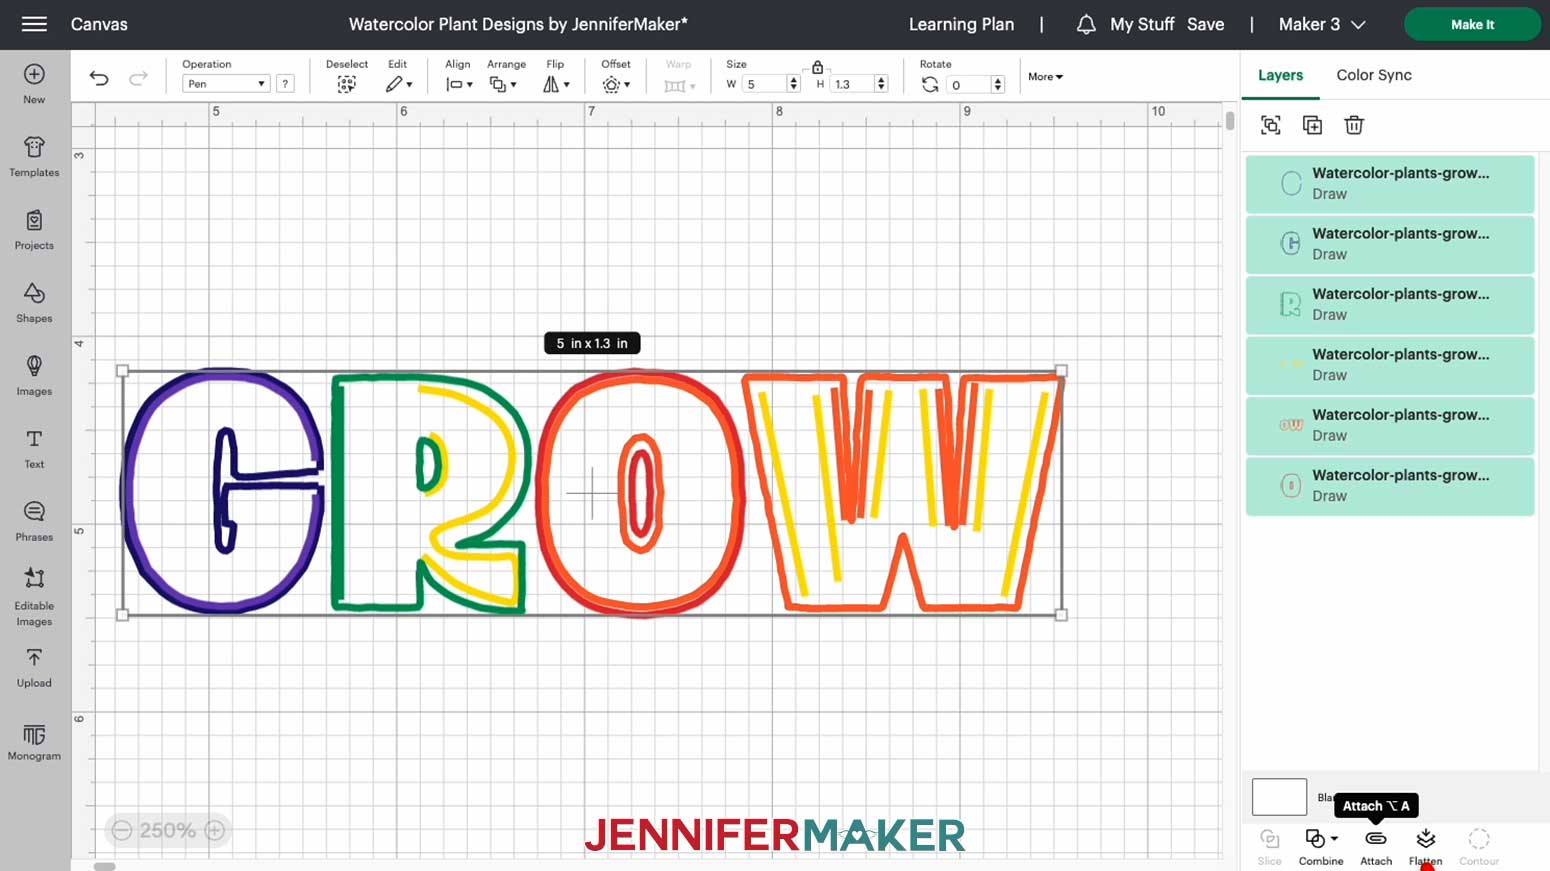 Select all the lines of the watercolor word GROW and choose Attach at the bottom right of the menu.